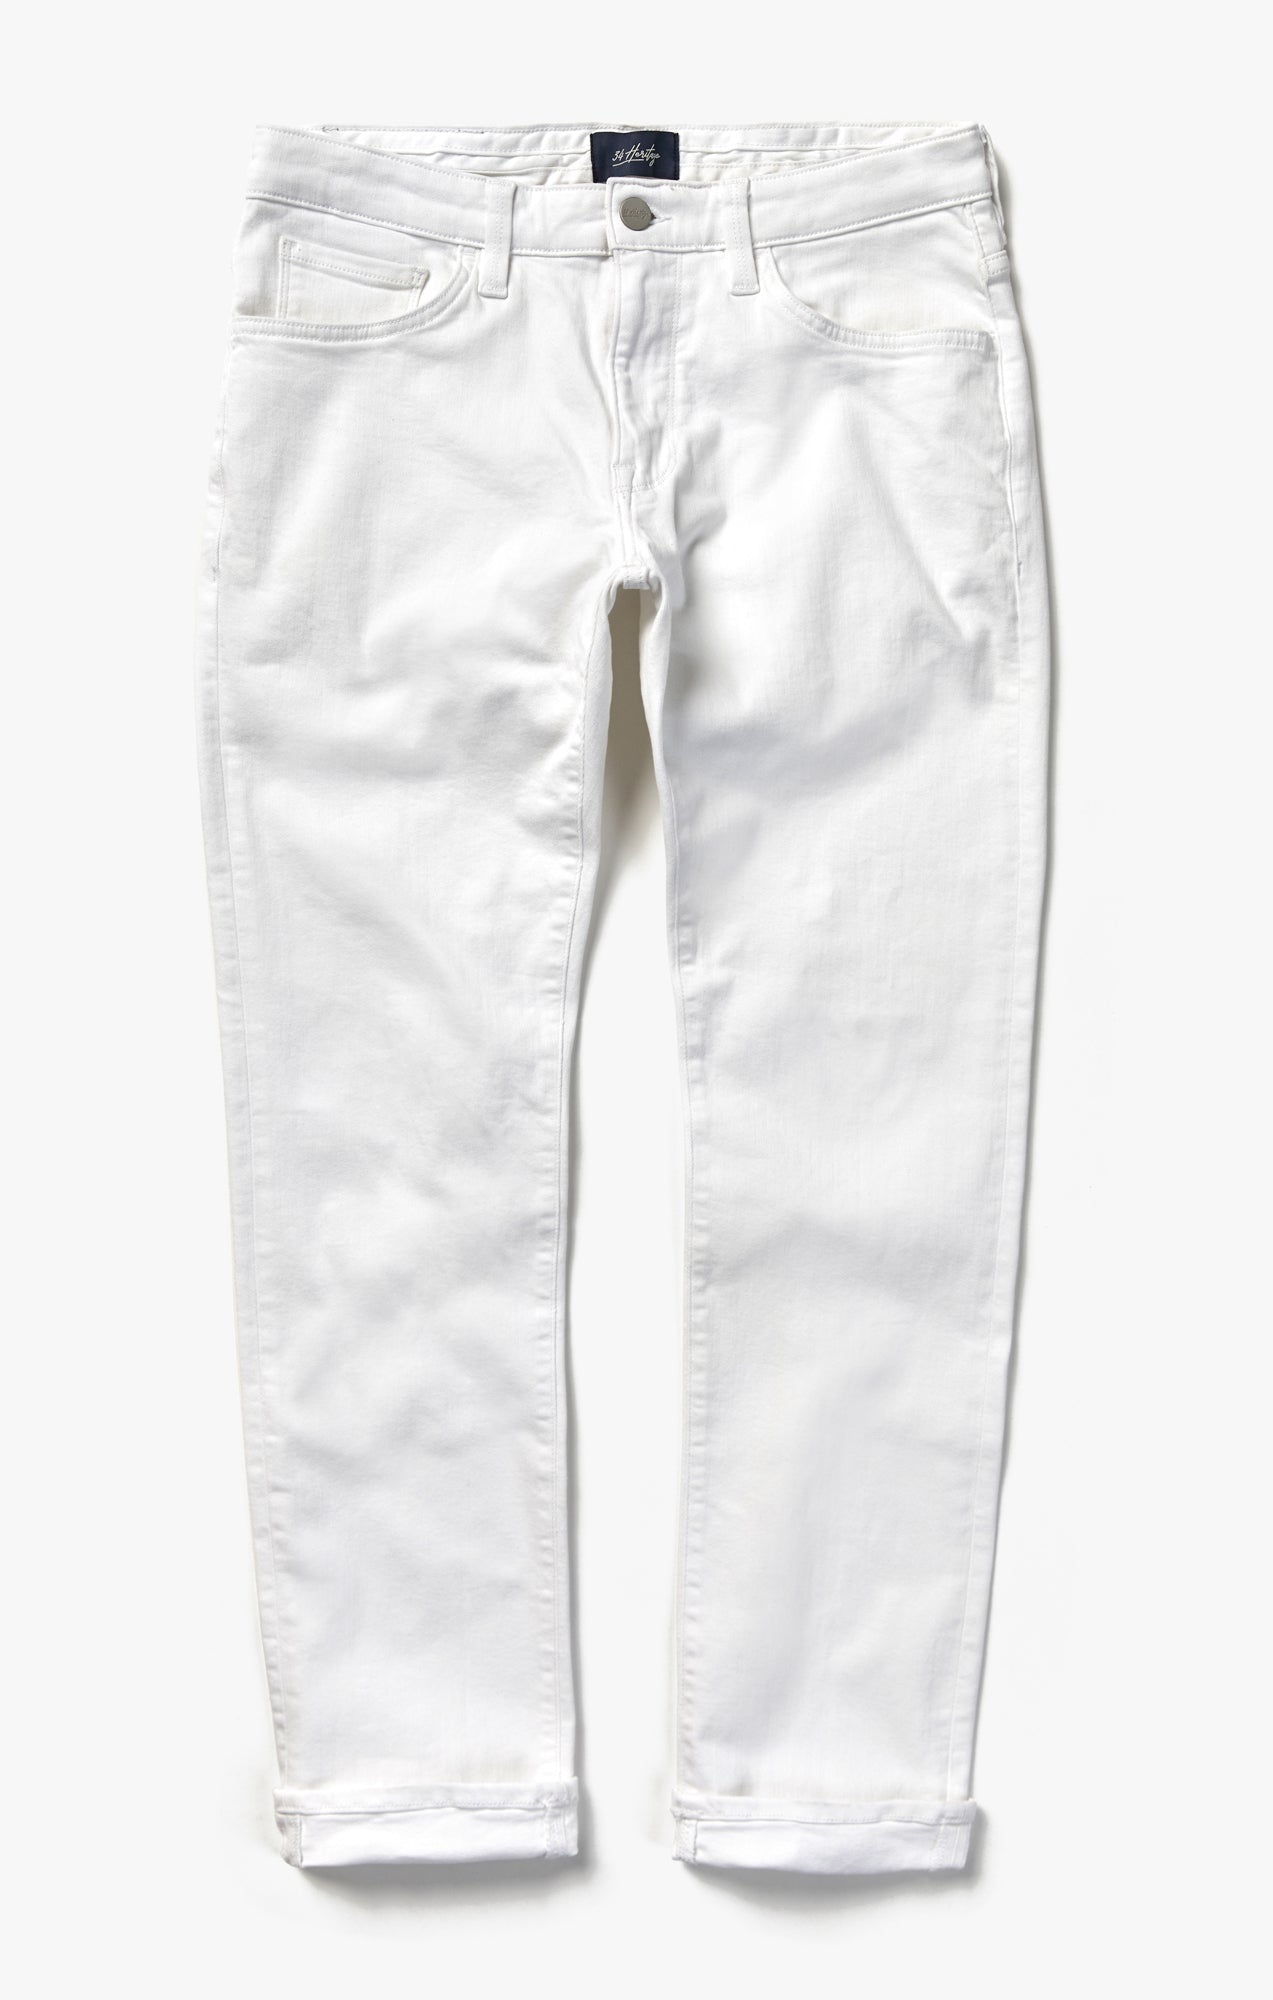 Cool Slim Leg Pants In Double White Comfort Image 9